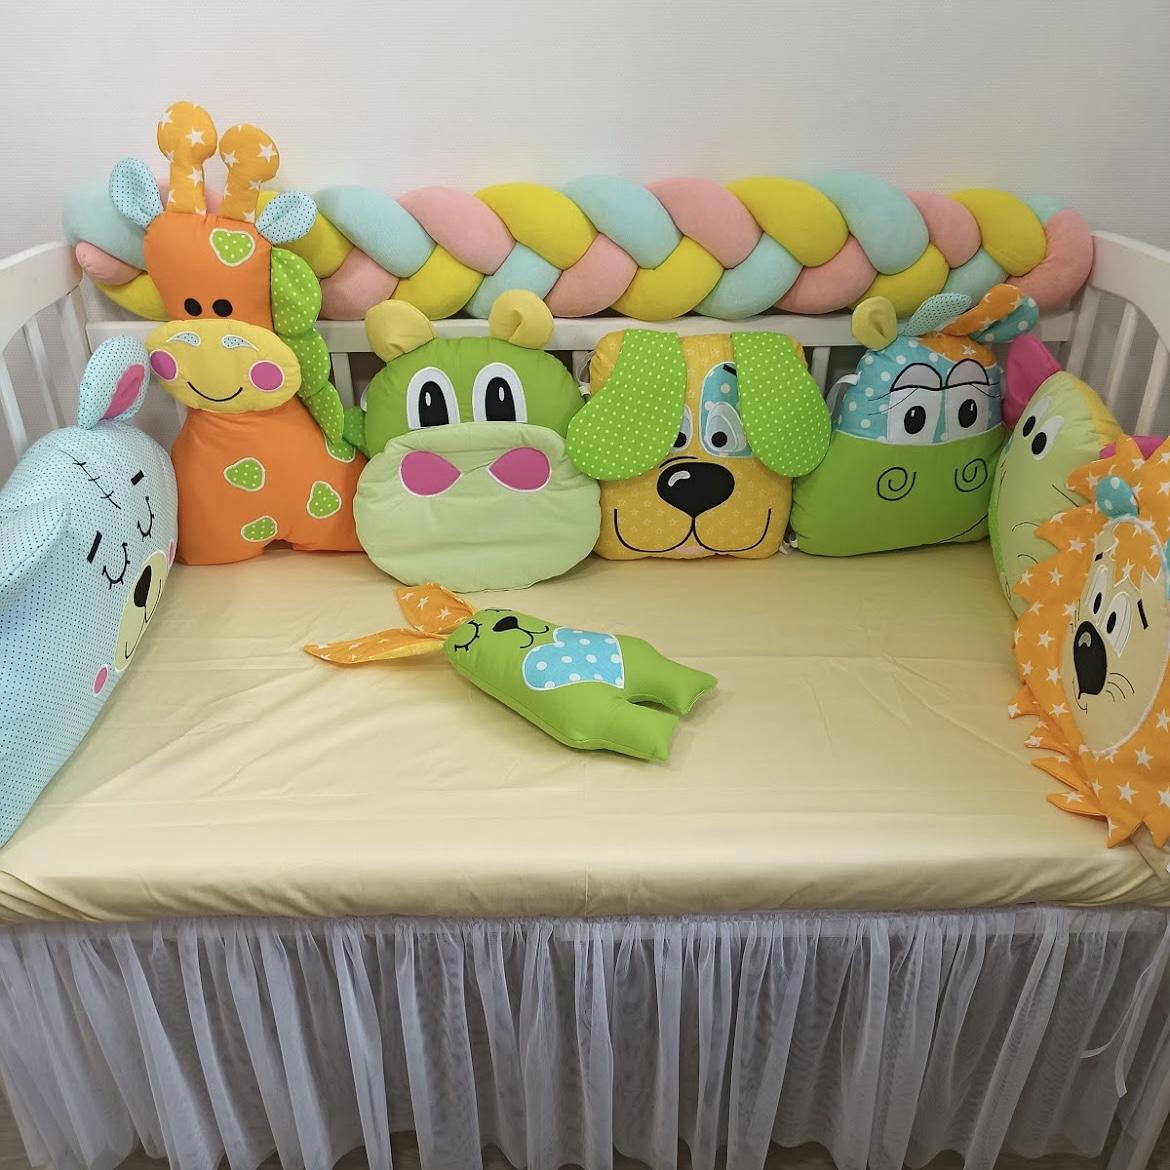 Set of colorful character cushions